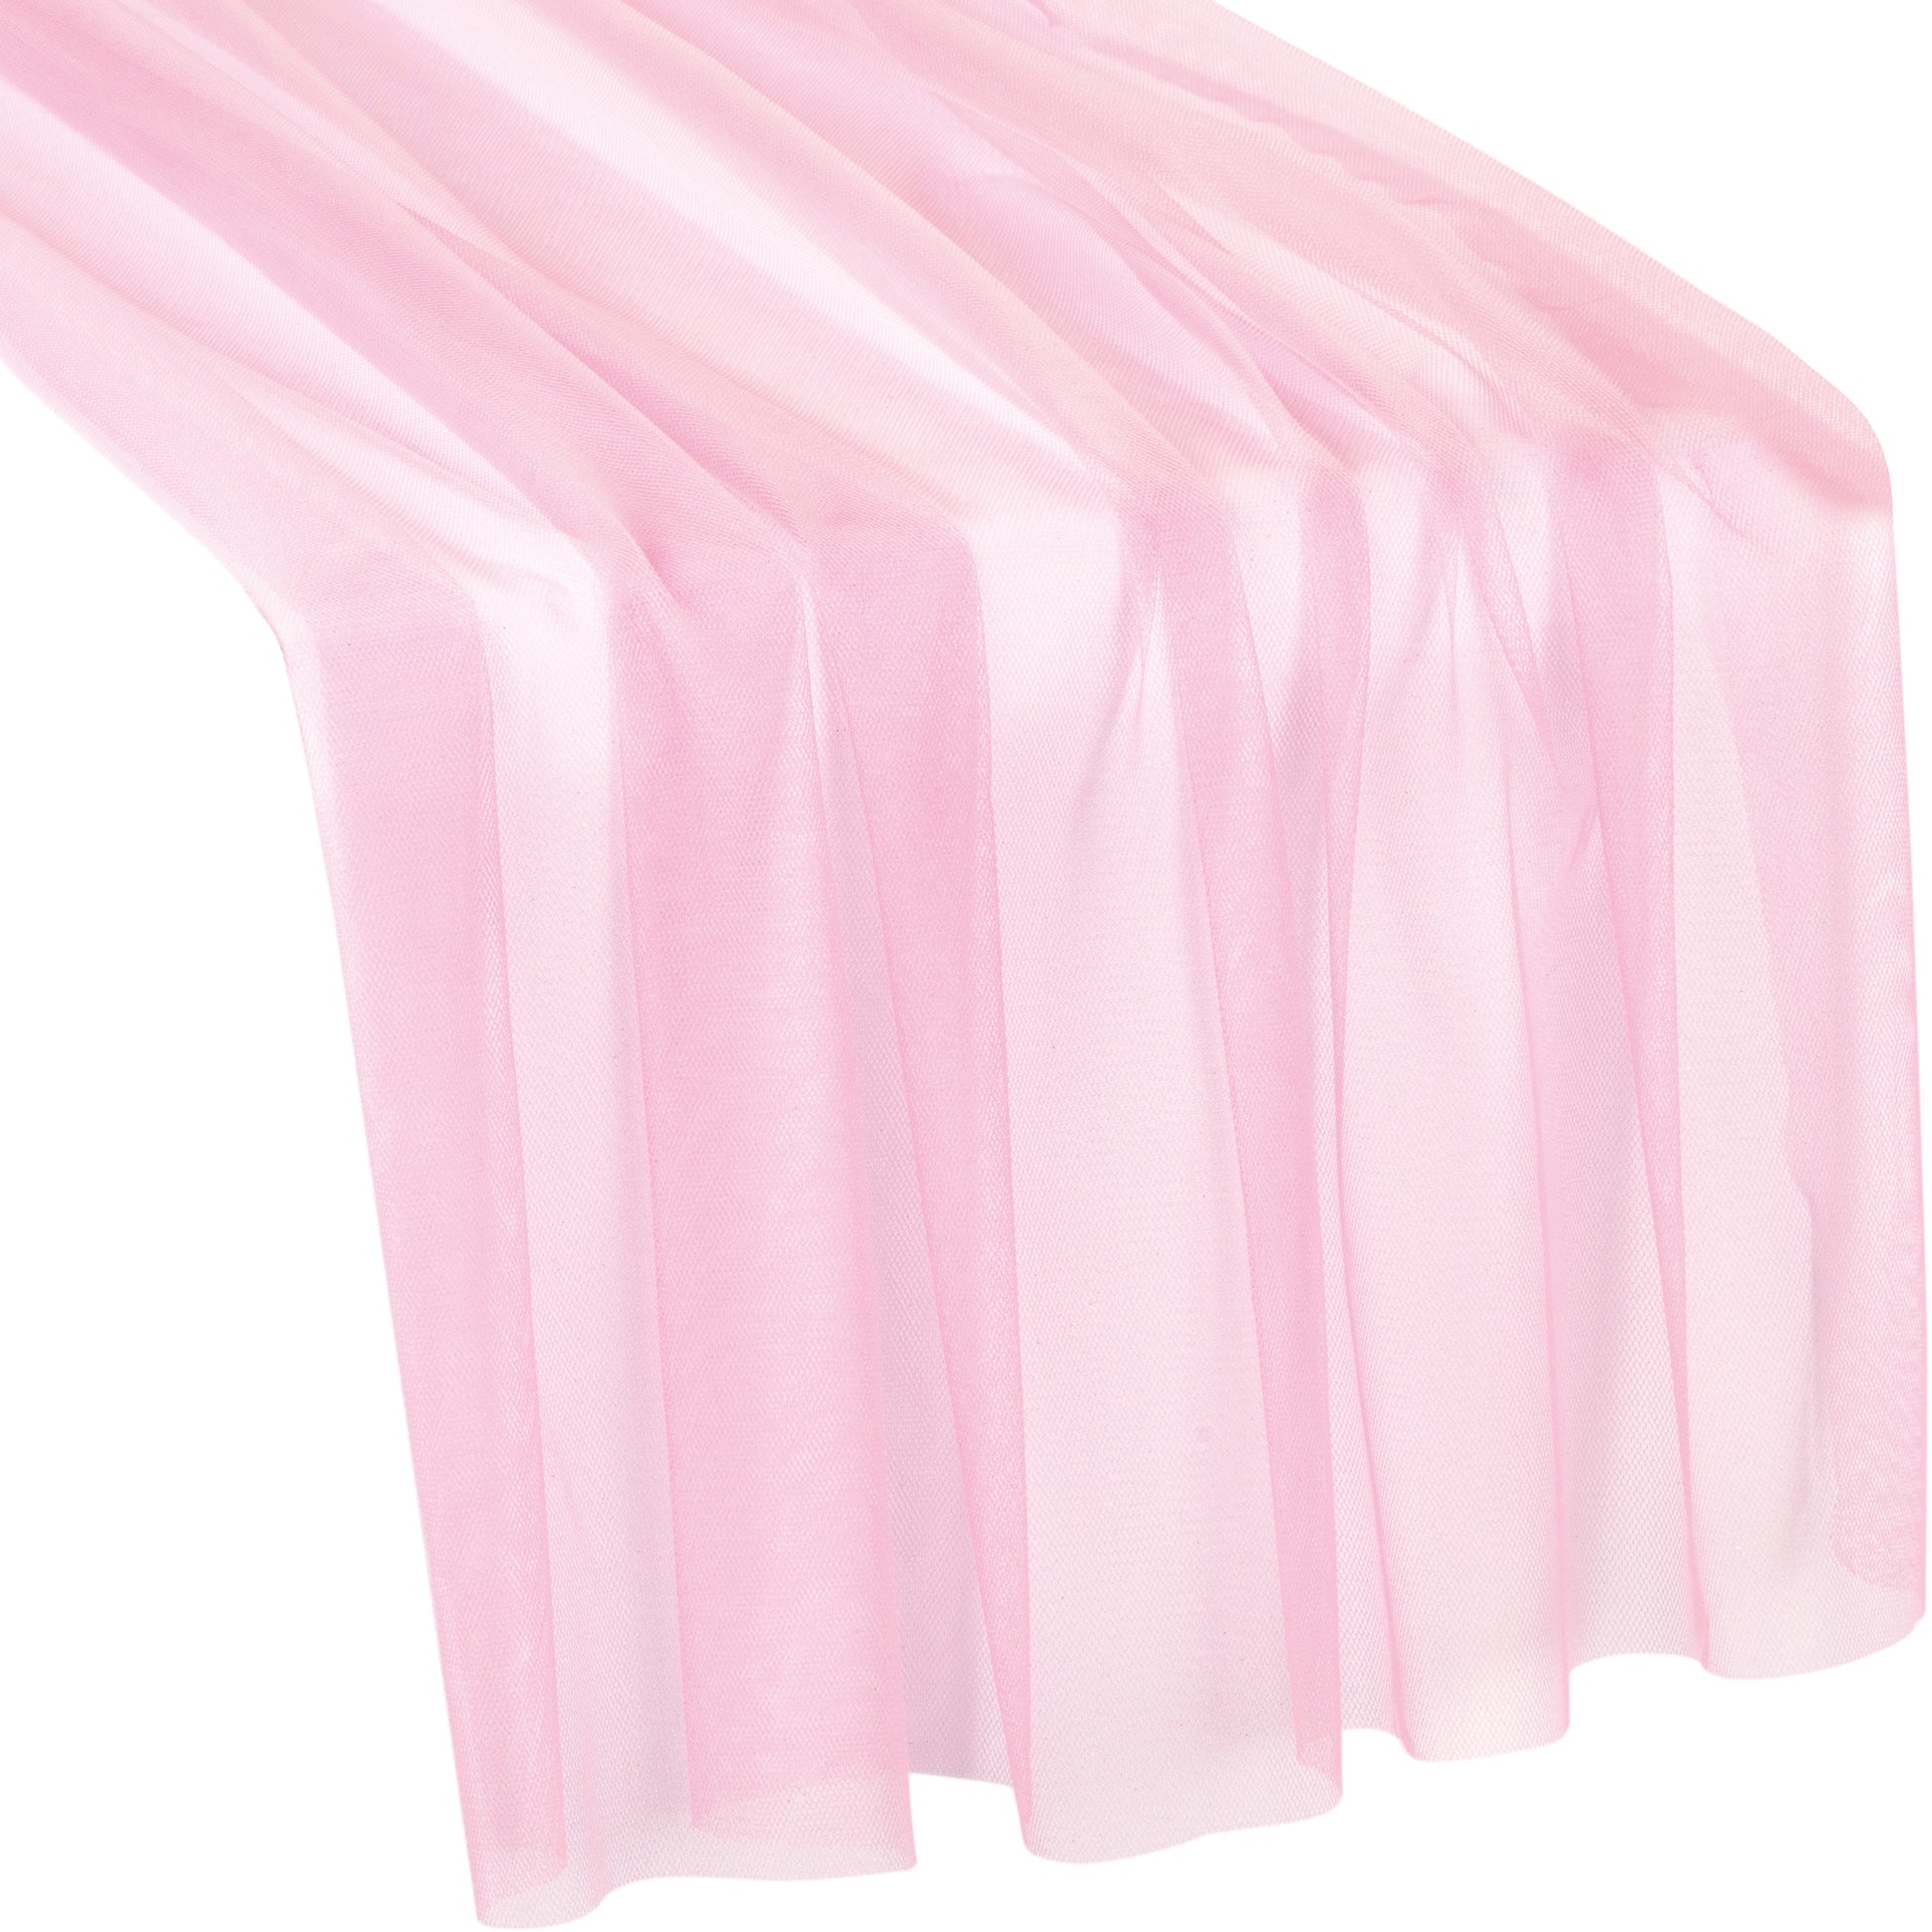 Soft Tulle Table Runner Extra Long 30" x 16ft - Dusty Rose/Mauve